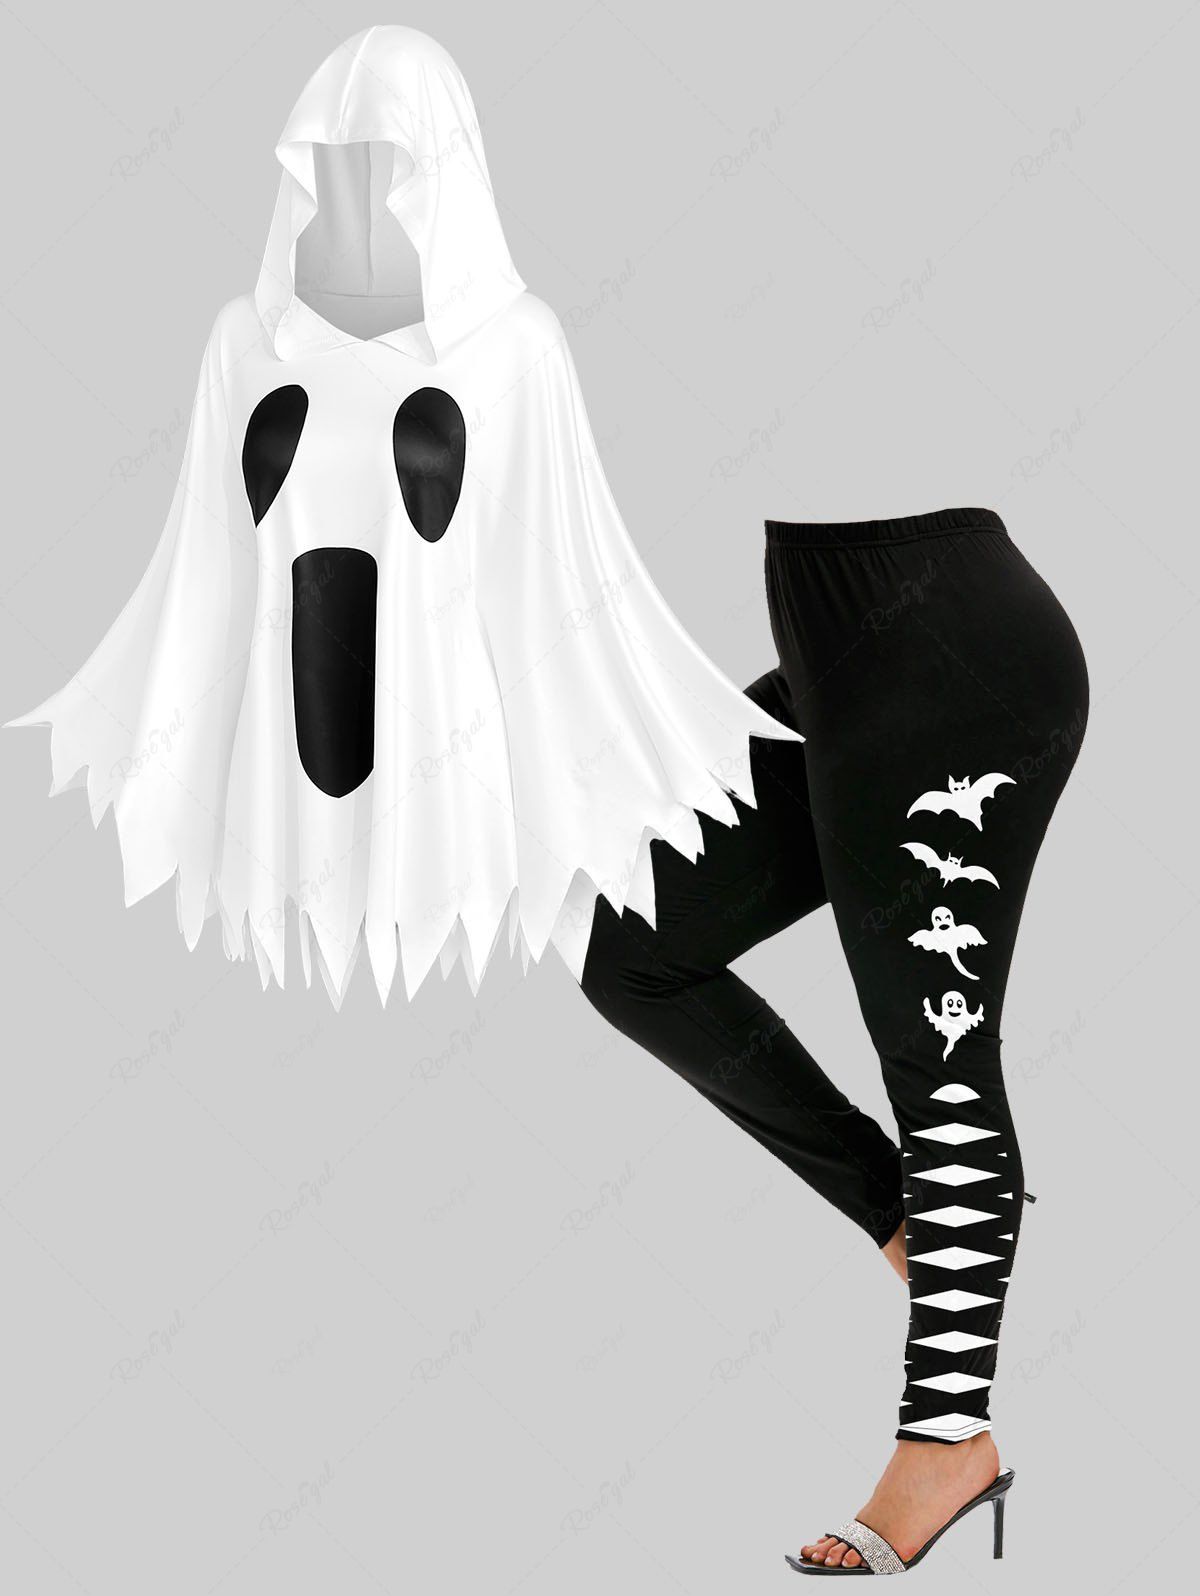 Fashion Halloween Costume Ghost Face Print Poncho Shawl Handkerchief Hooded Cape and Bat 3D Print Leggings Plus Size Outfit  